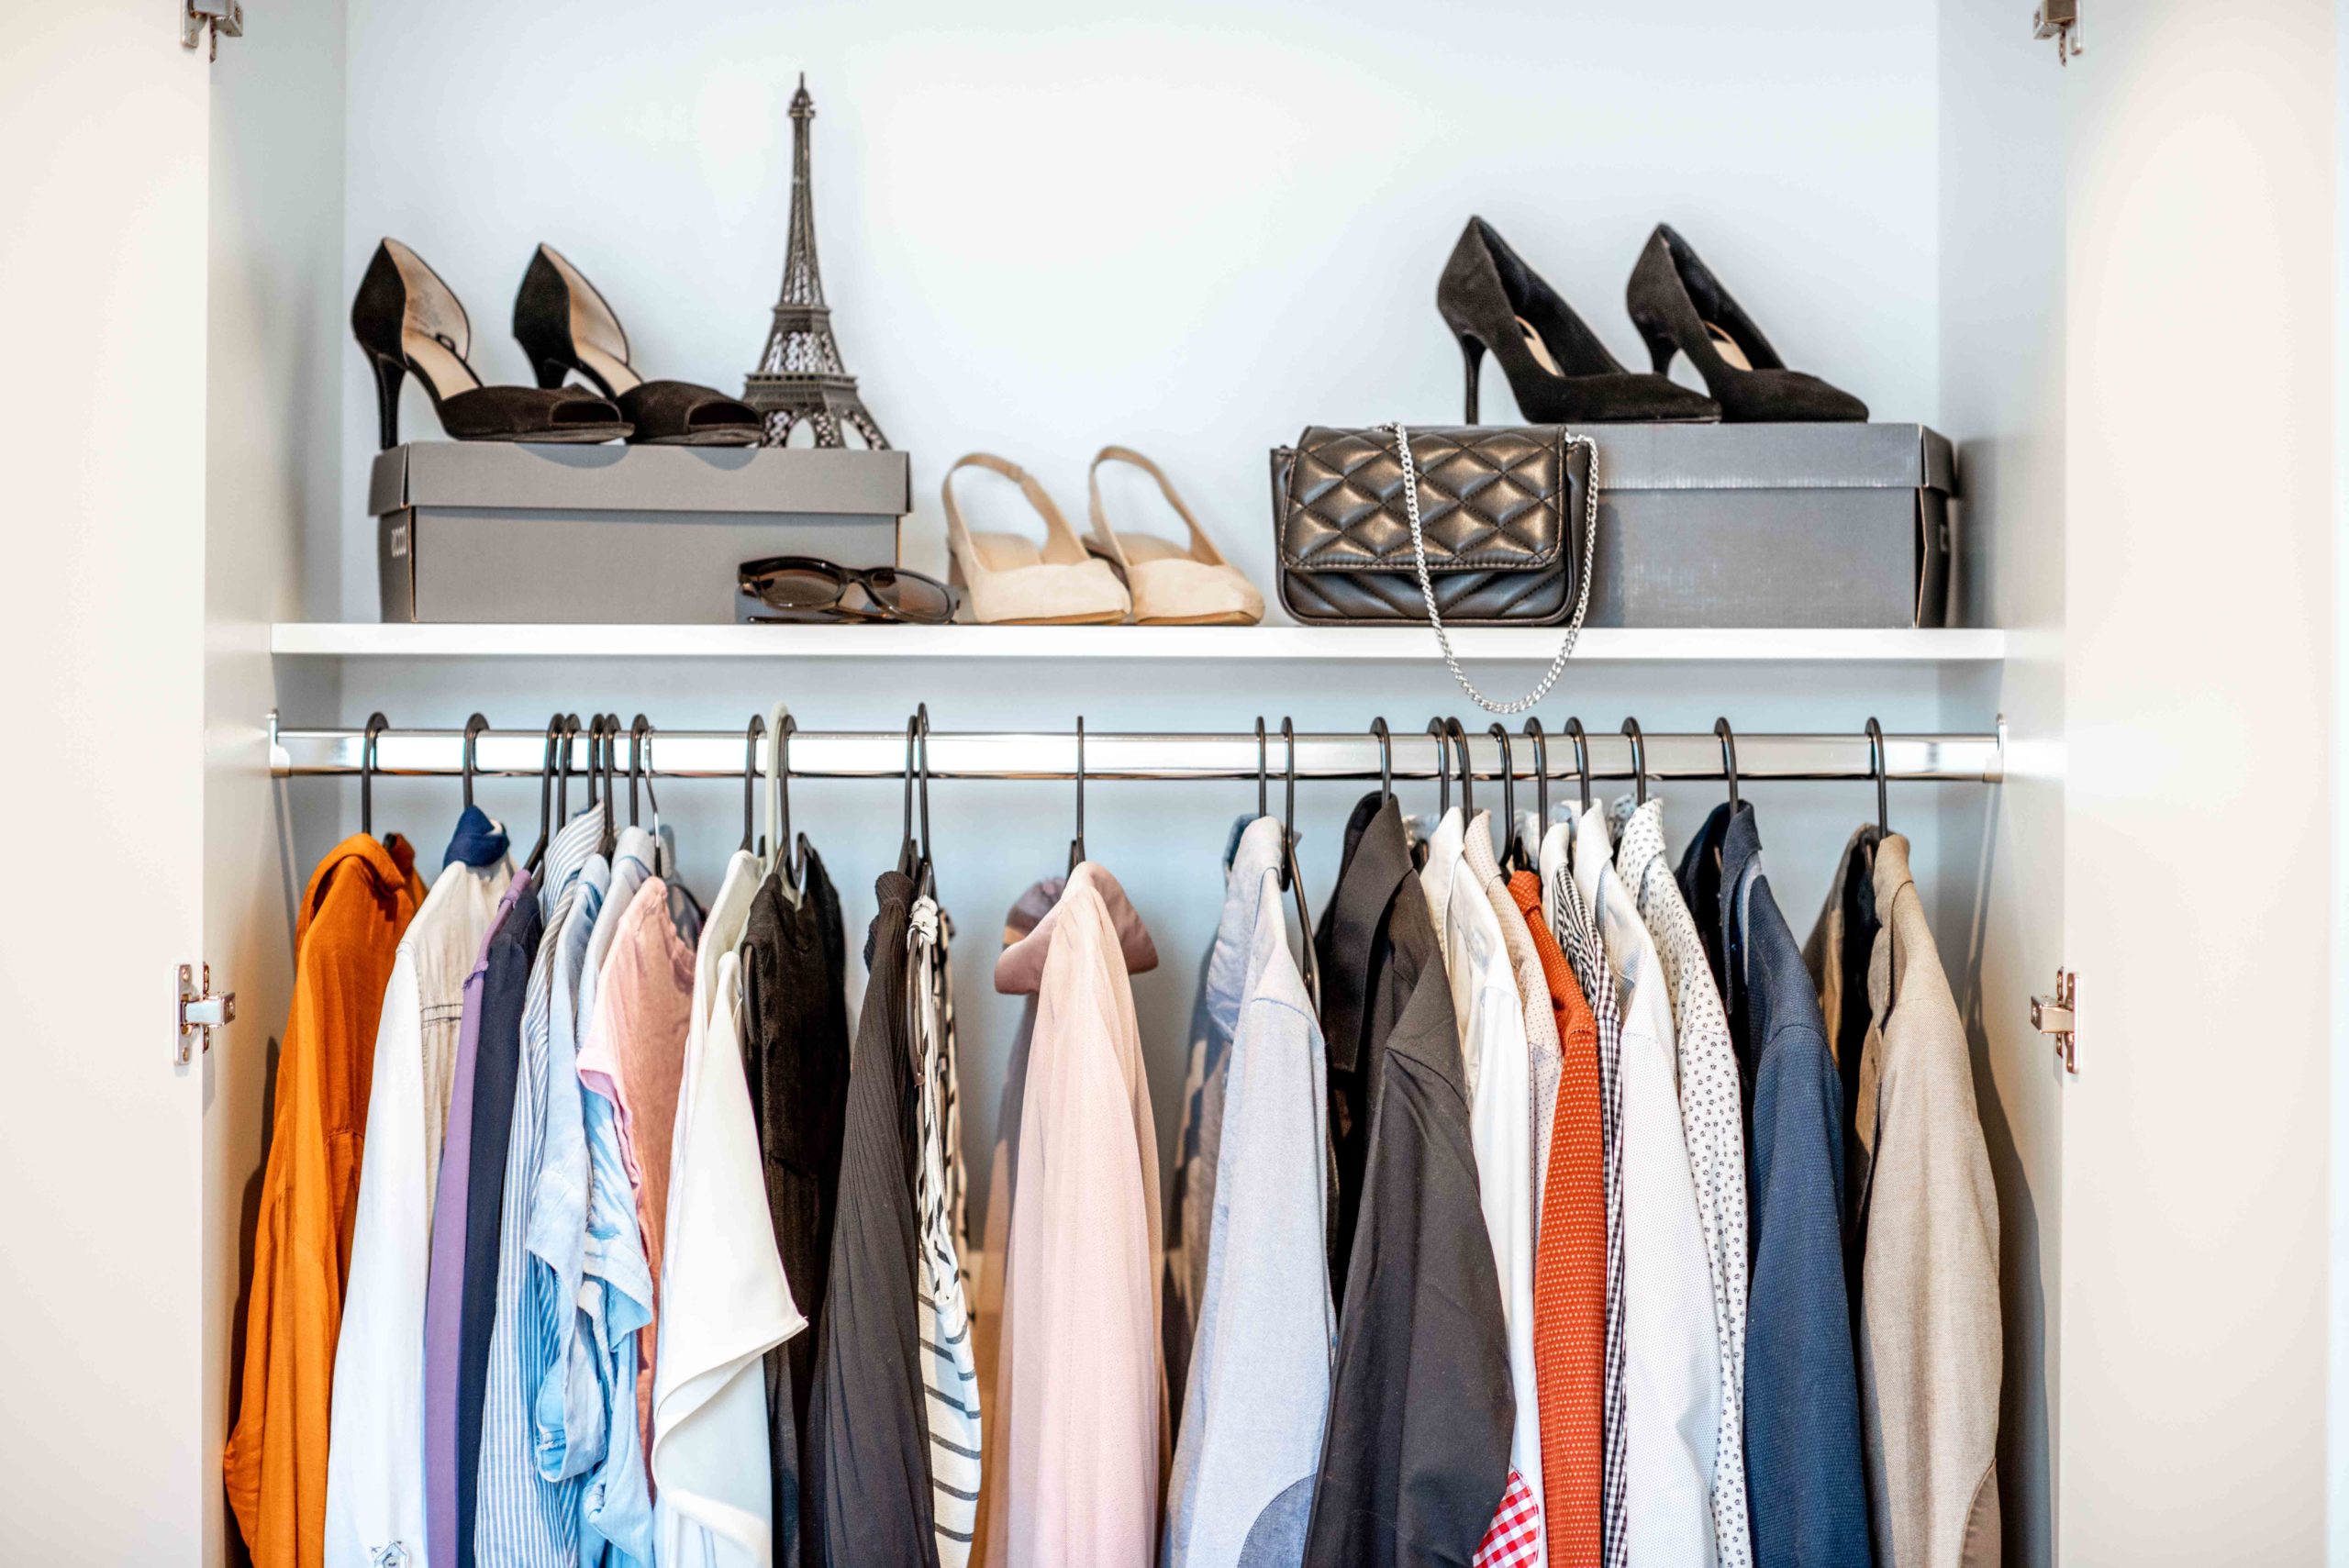 Clothes in the wardrobe. Photo by RossHelen via Envato Elements